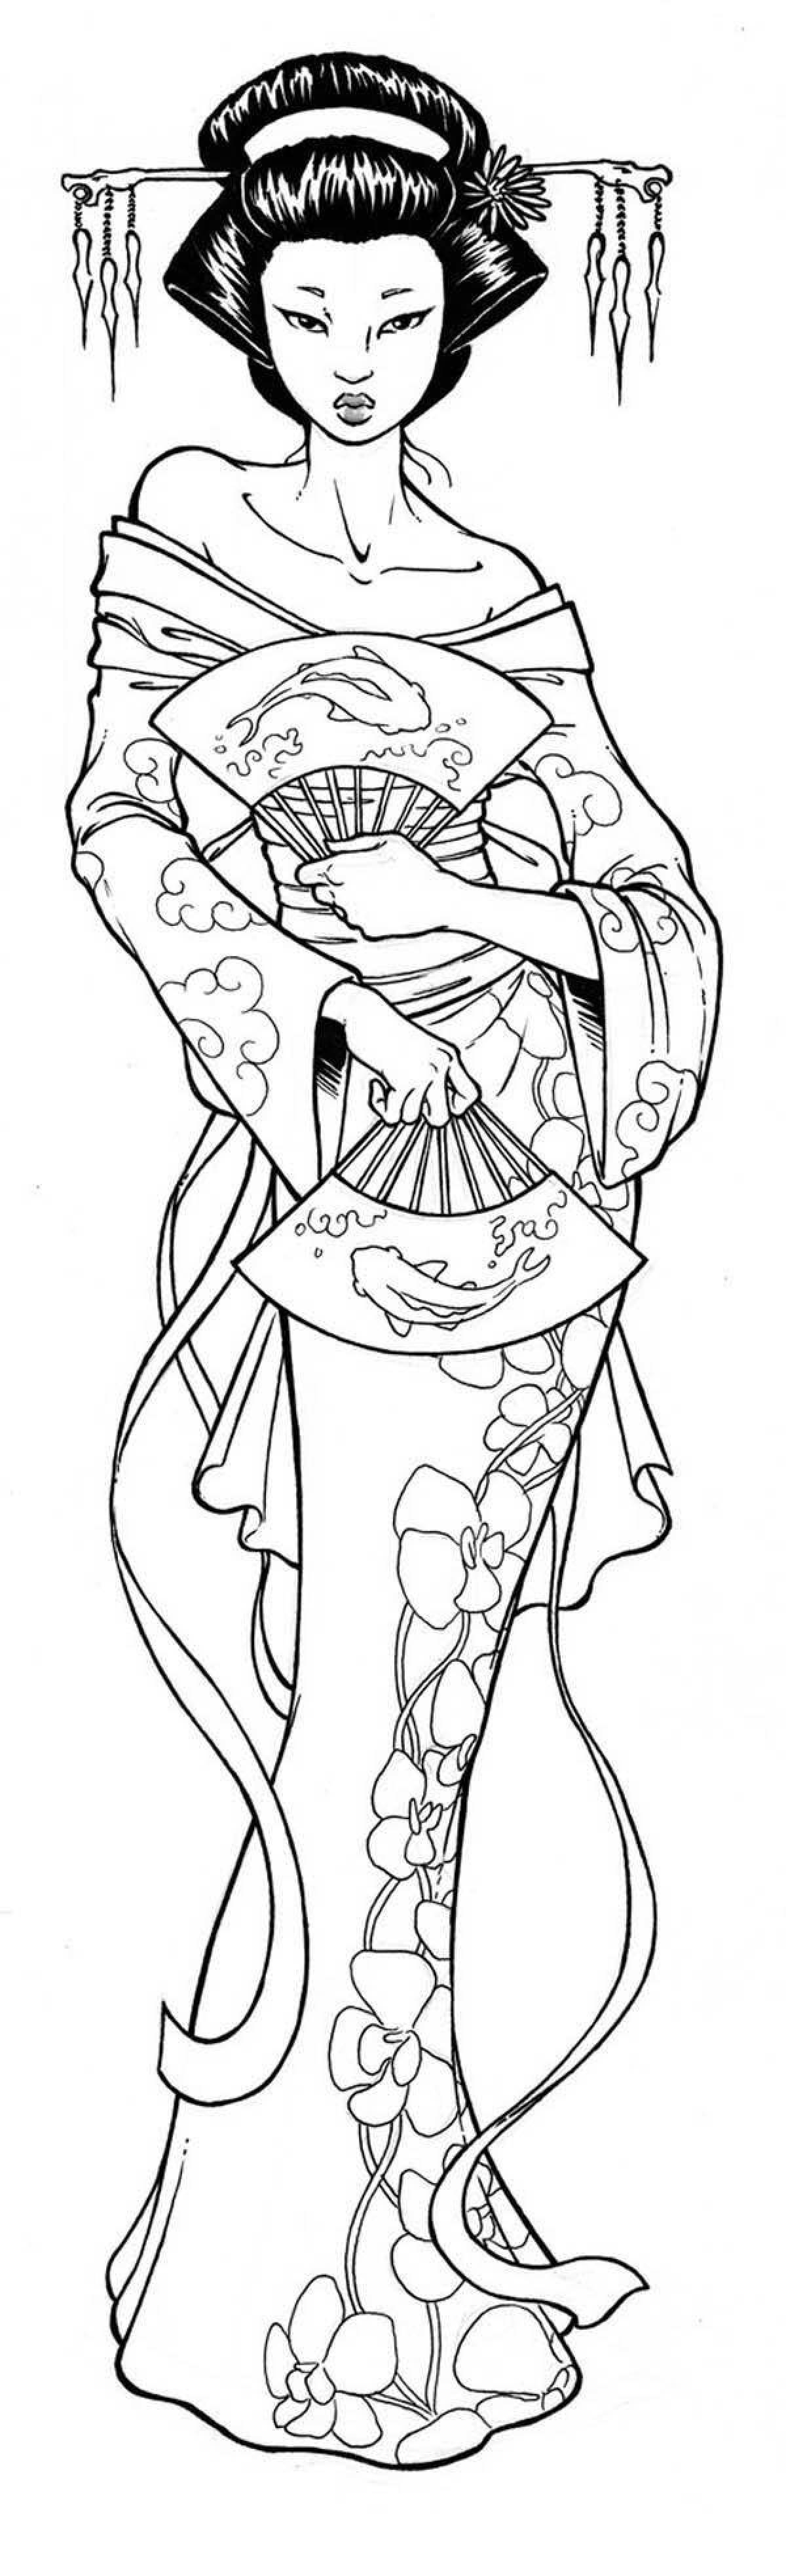 Coloring poised Japanese woman in kimono 4th grade